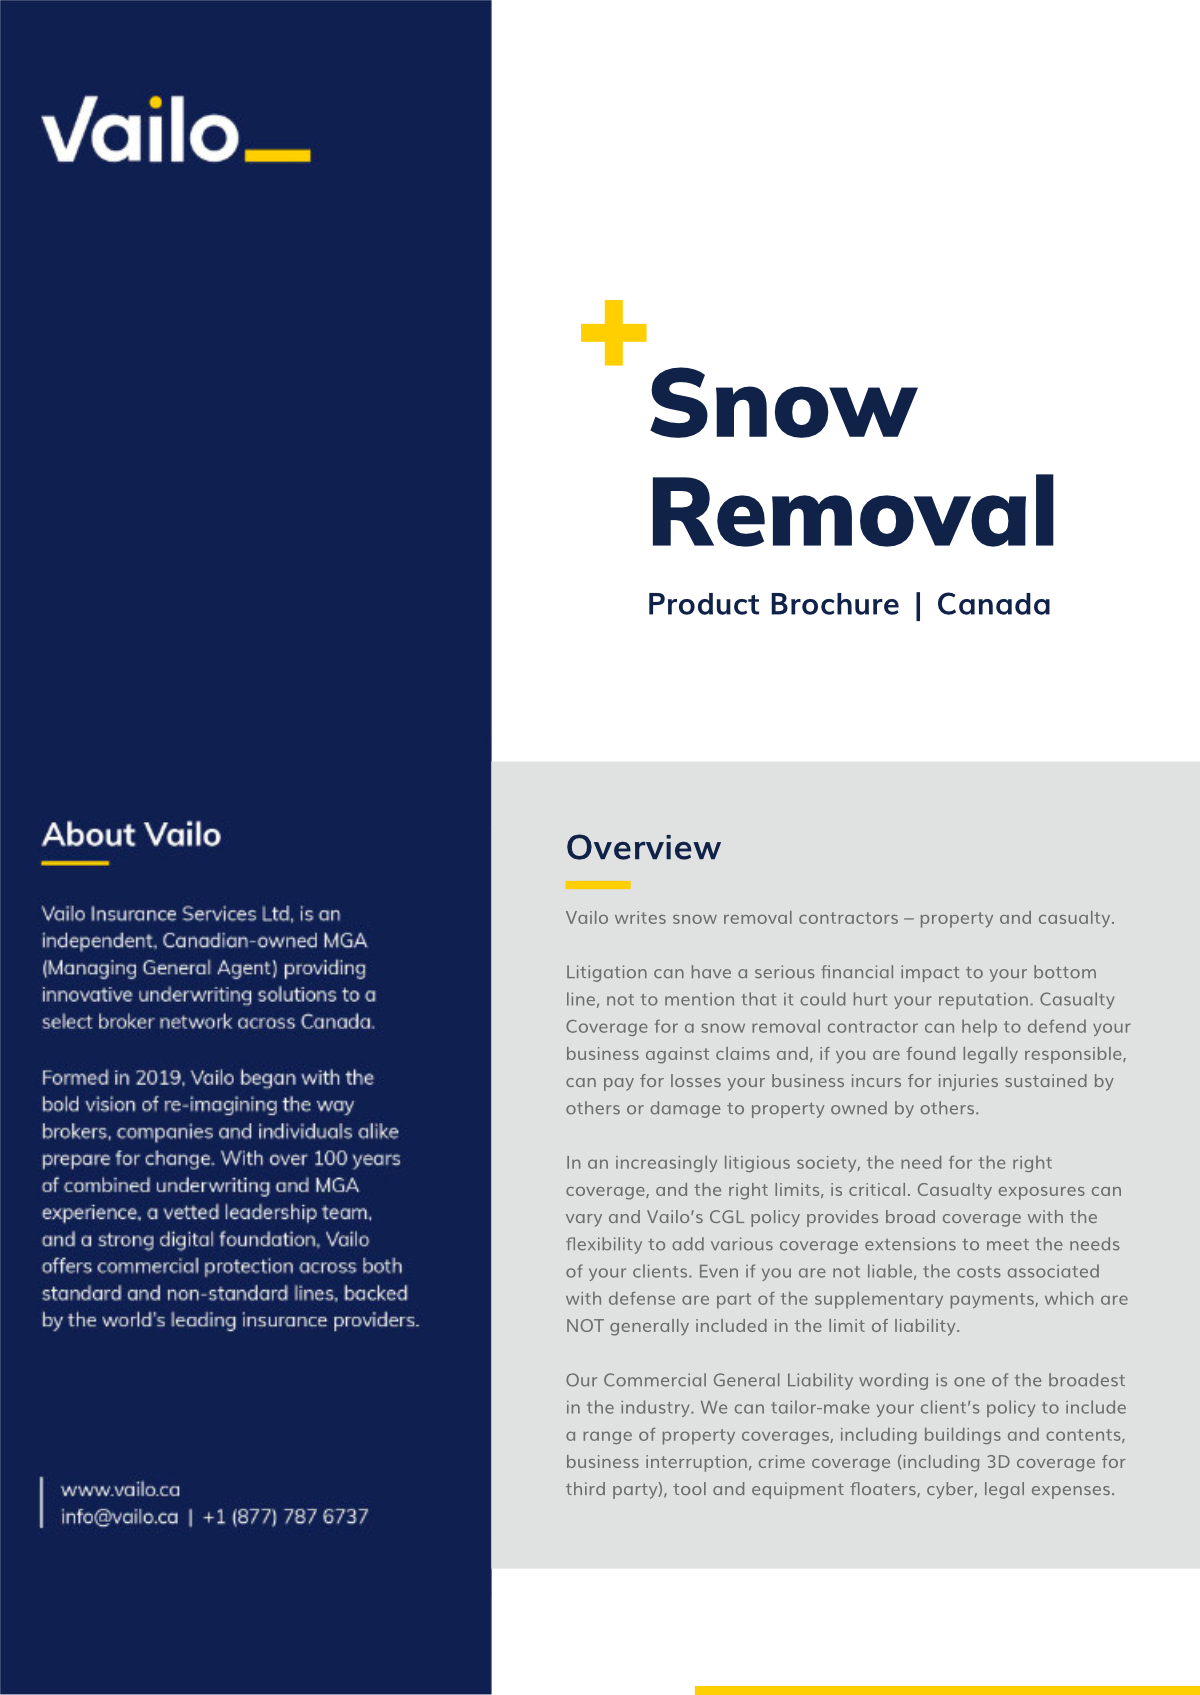 Snow Removal Product Brochure